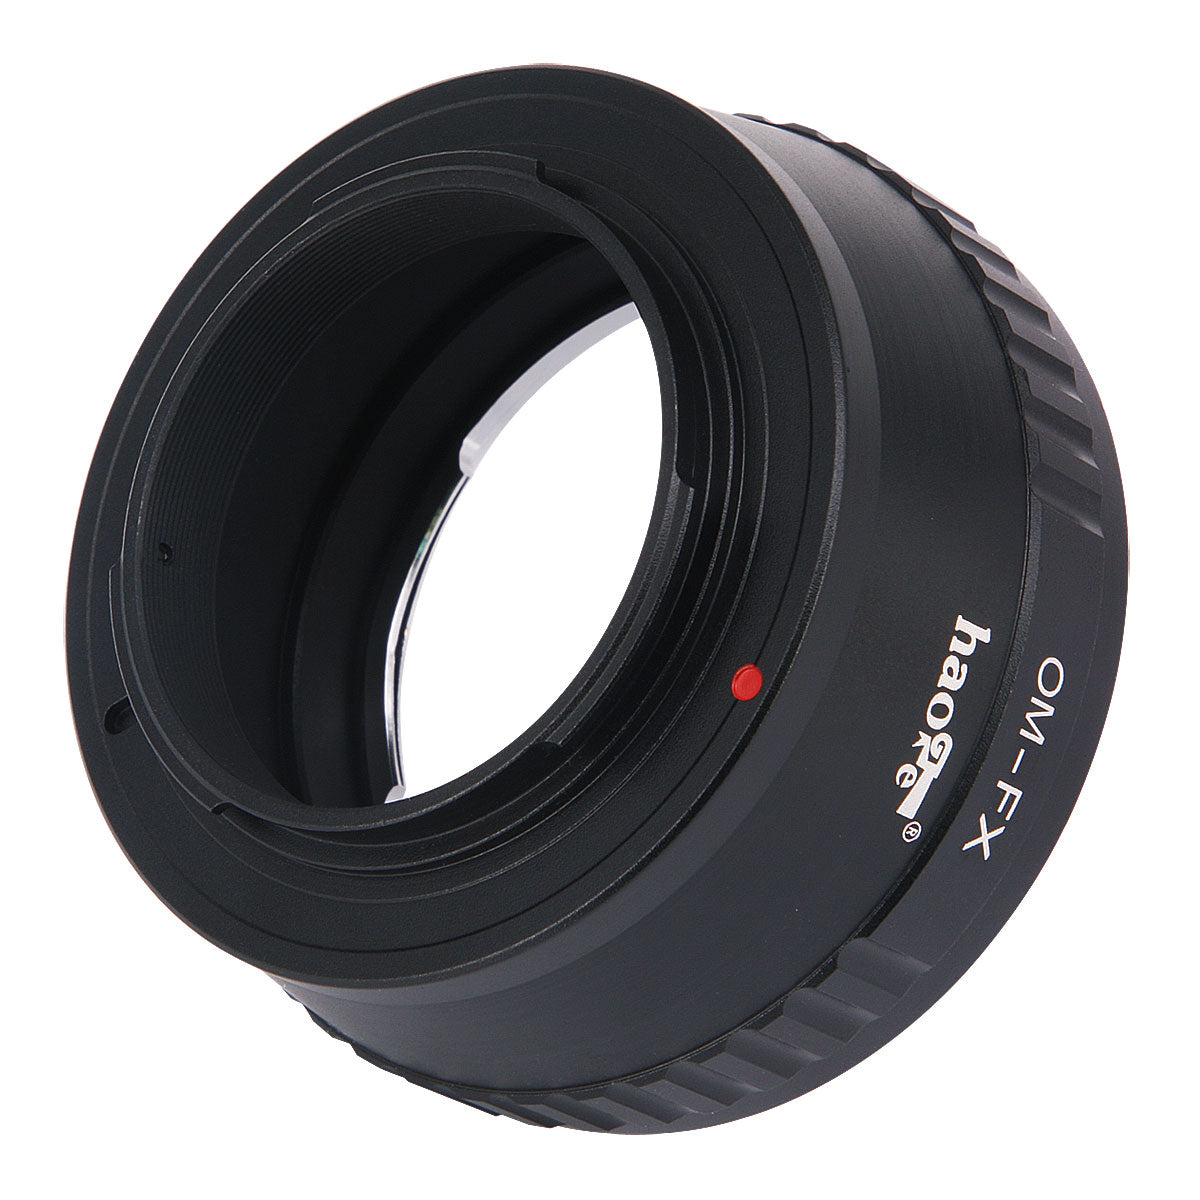 Haoge Manual Lens Mount Adapter for Olympus OM Lens to Fujifilm Fuji X FX mount Camera such as X-A1 X-A2 X-A3 X-A5 X-A10 X-A20 X-E1 X-E2 X-E2s X-E3 X-H1 X-M1 X-Pro1 X-Pro2 X-T1 X-T2 X-T10 X-T20